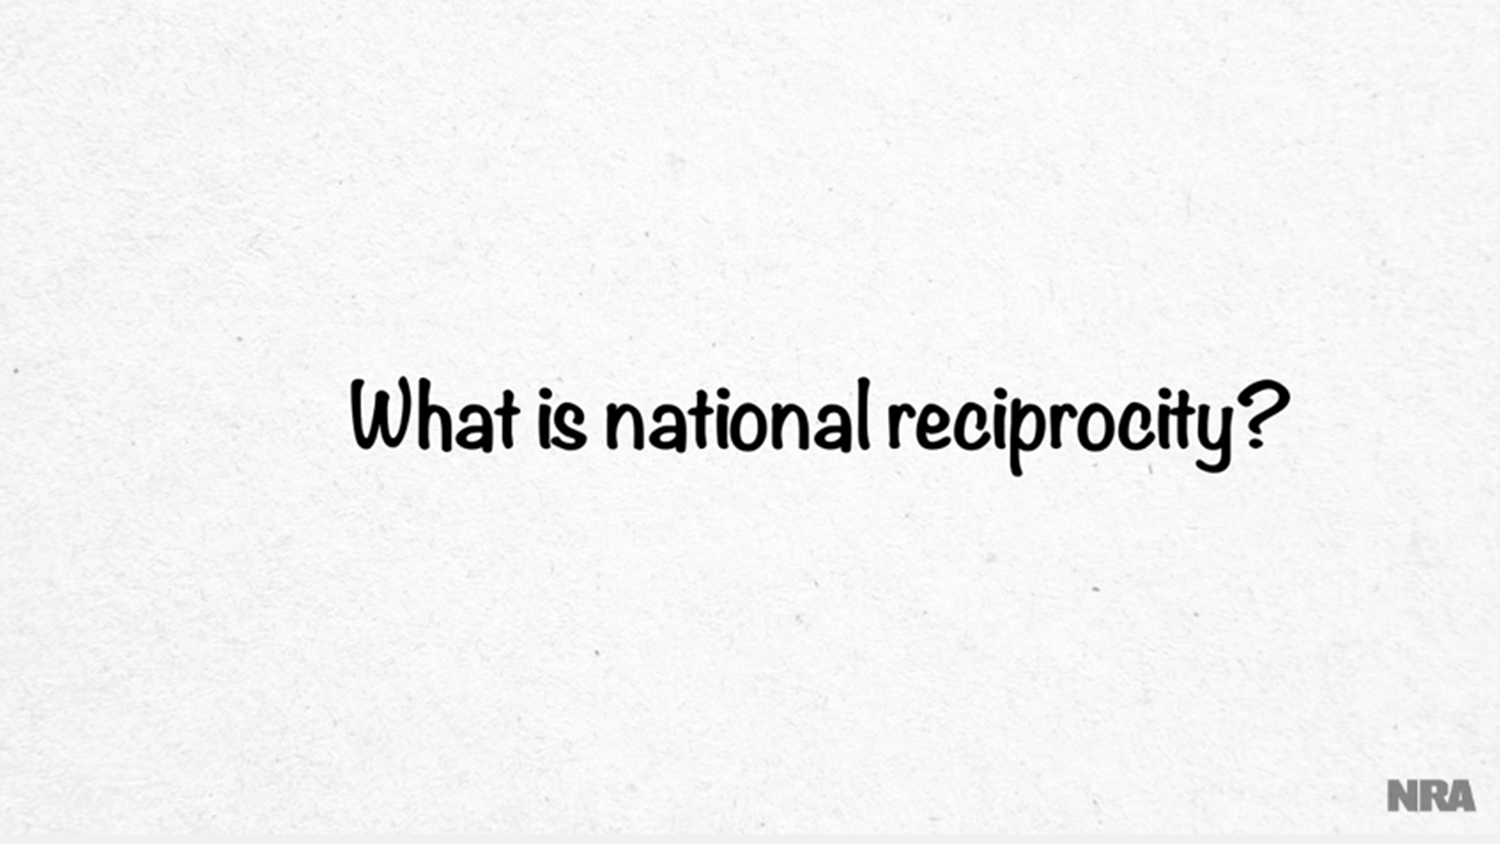 What is national concealed carry reciprocity?